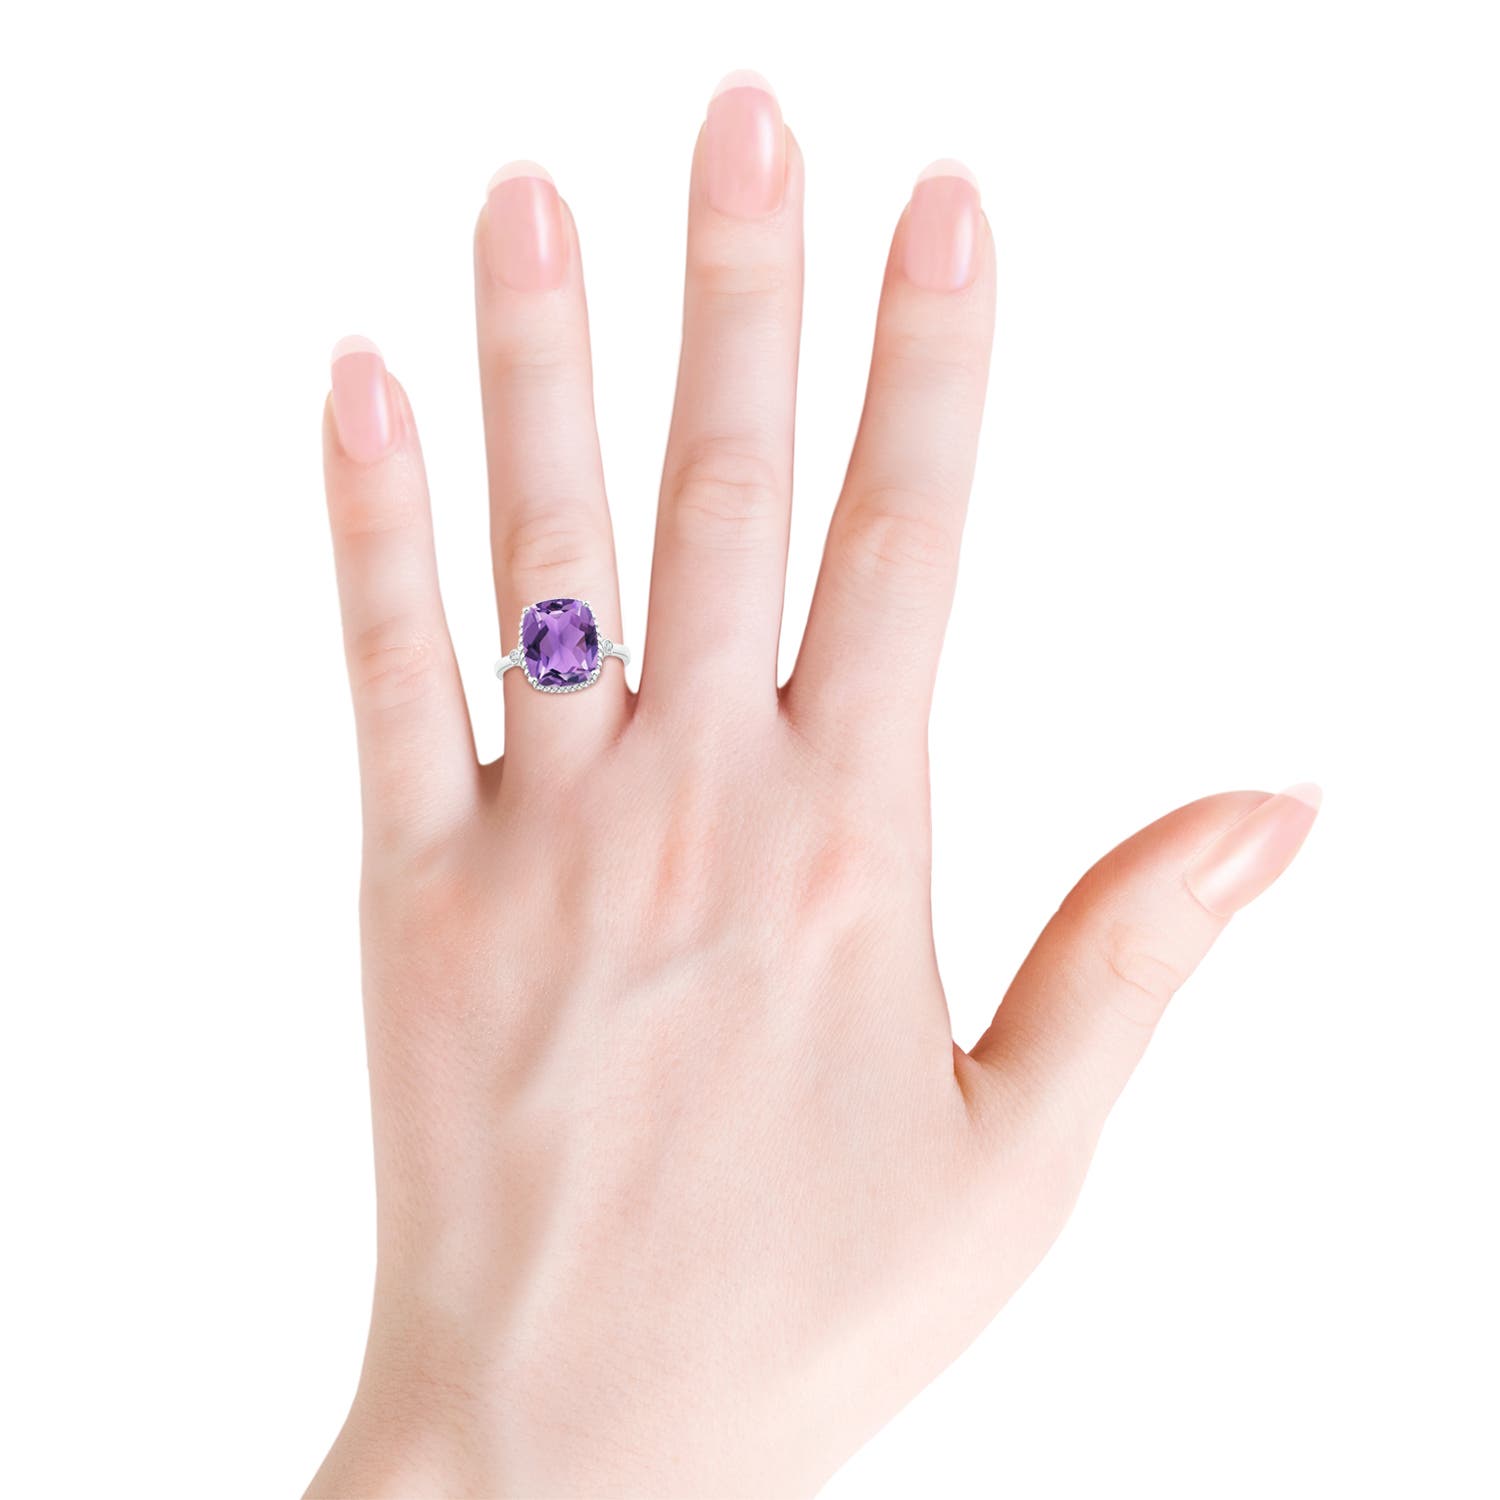 AA - Amethyst / 4.71 CT / 14 KT White Gold